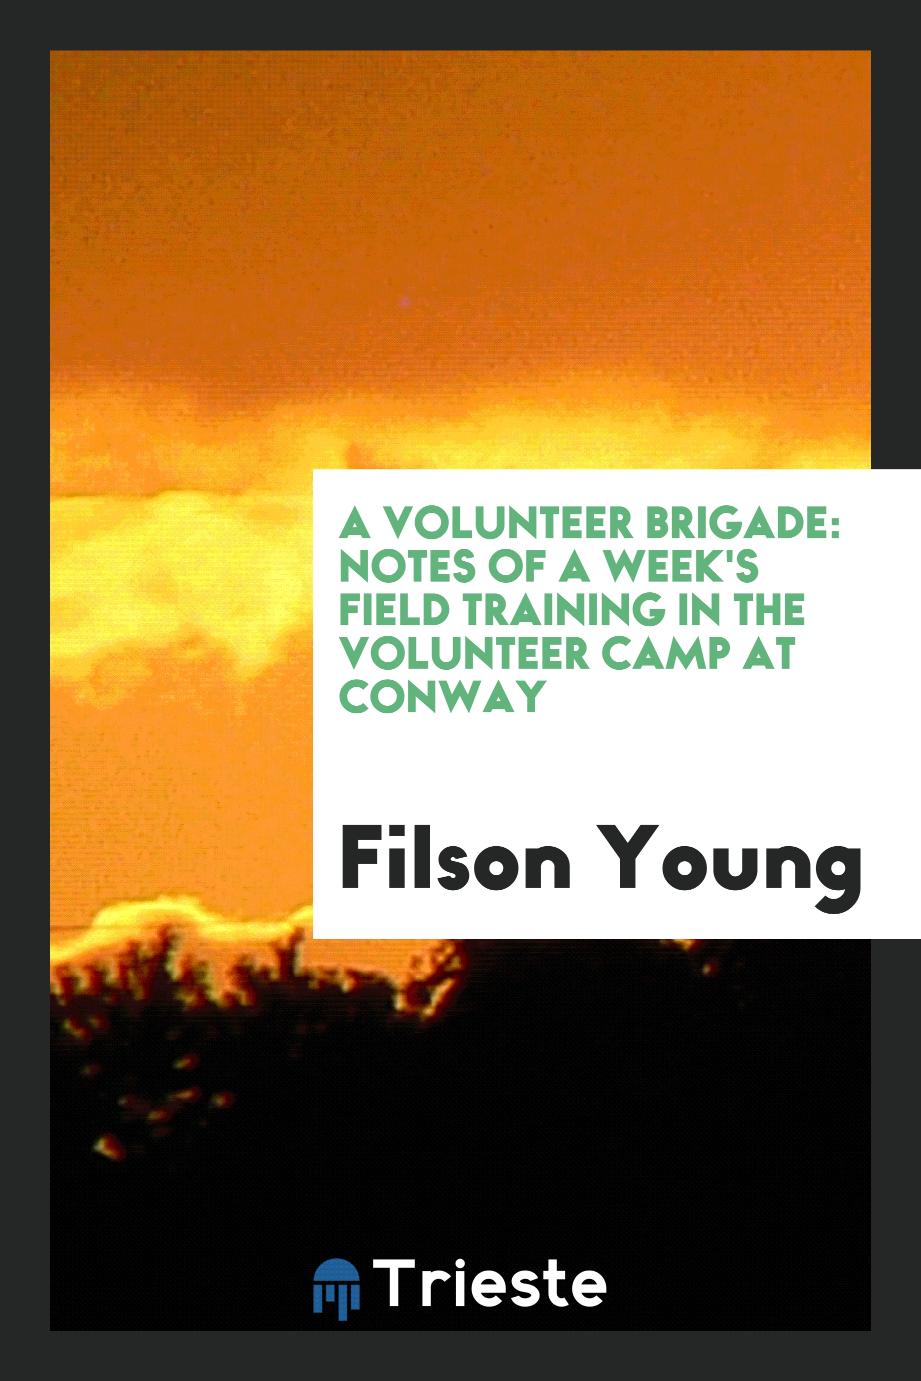 A Volunteer Brigade: Notes of a Week's Field Training in the Volunteer Camp at conway